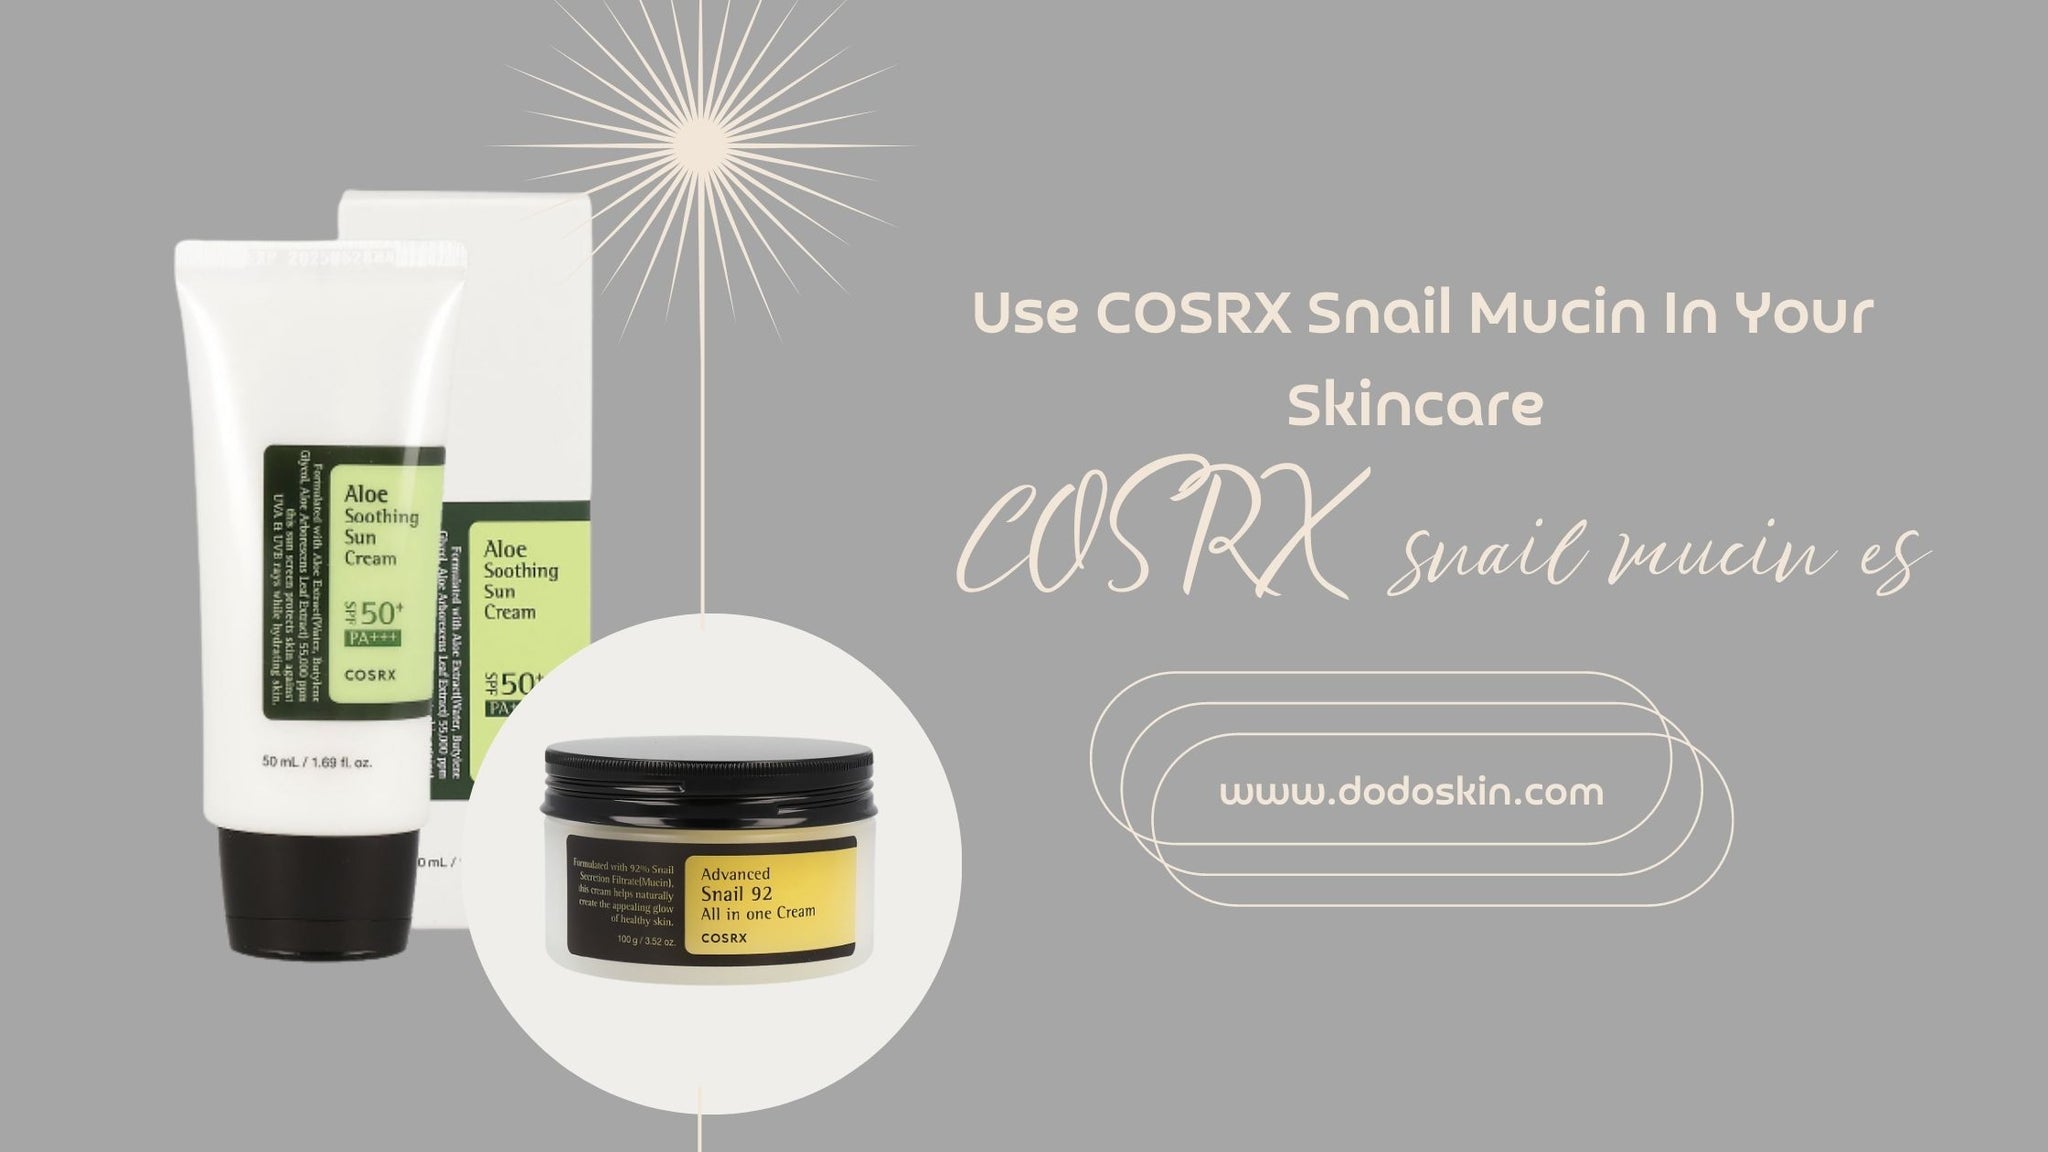 How To Use COSRX Snail Mucin In Your Skincare Routine?